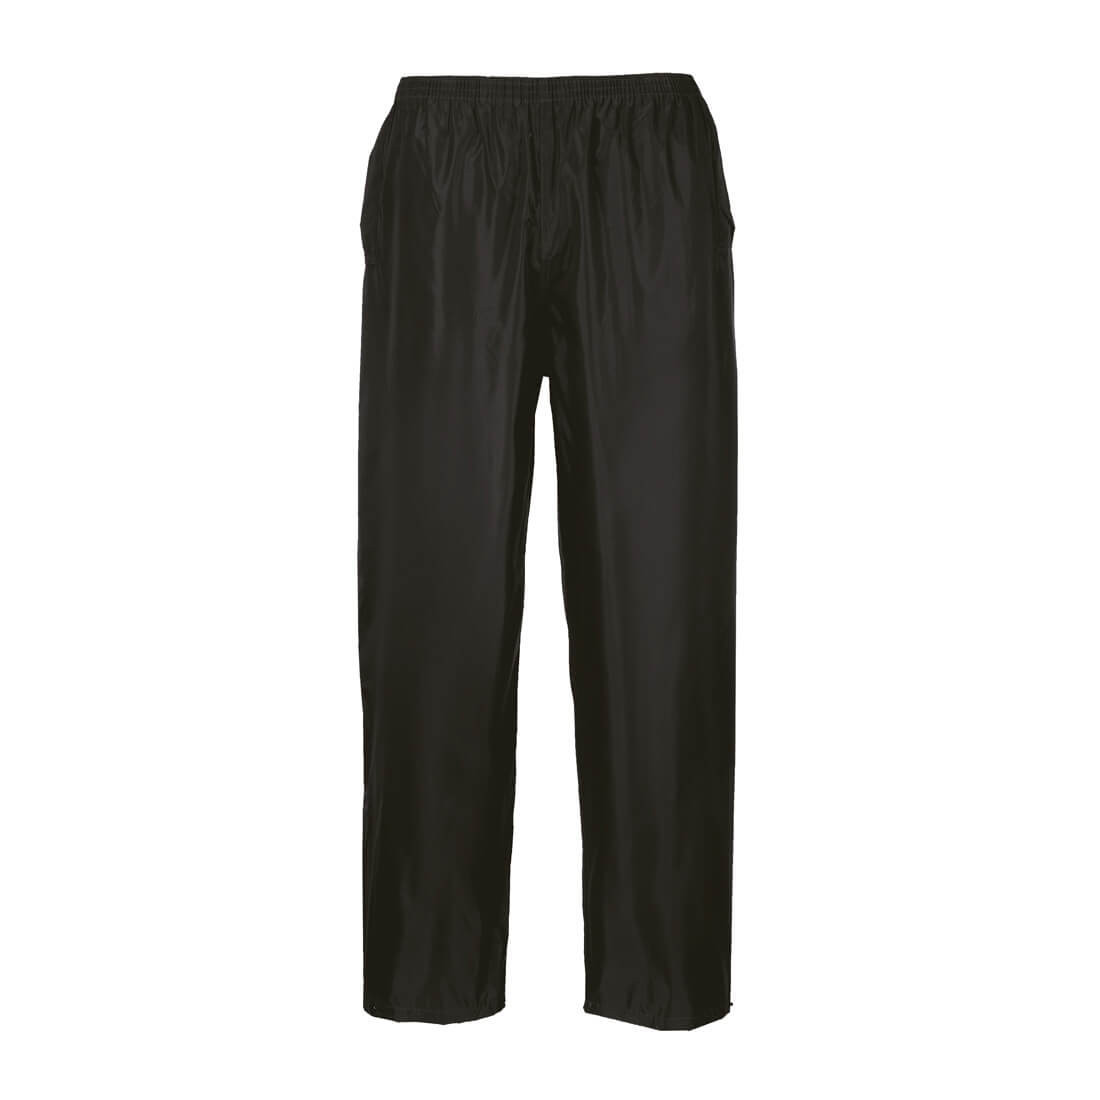 Classic Adult Rain Trousers - Safetywear